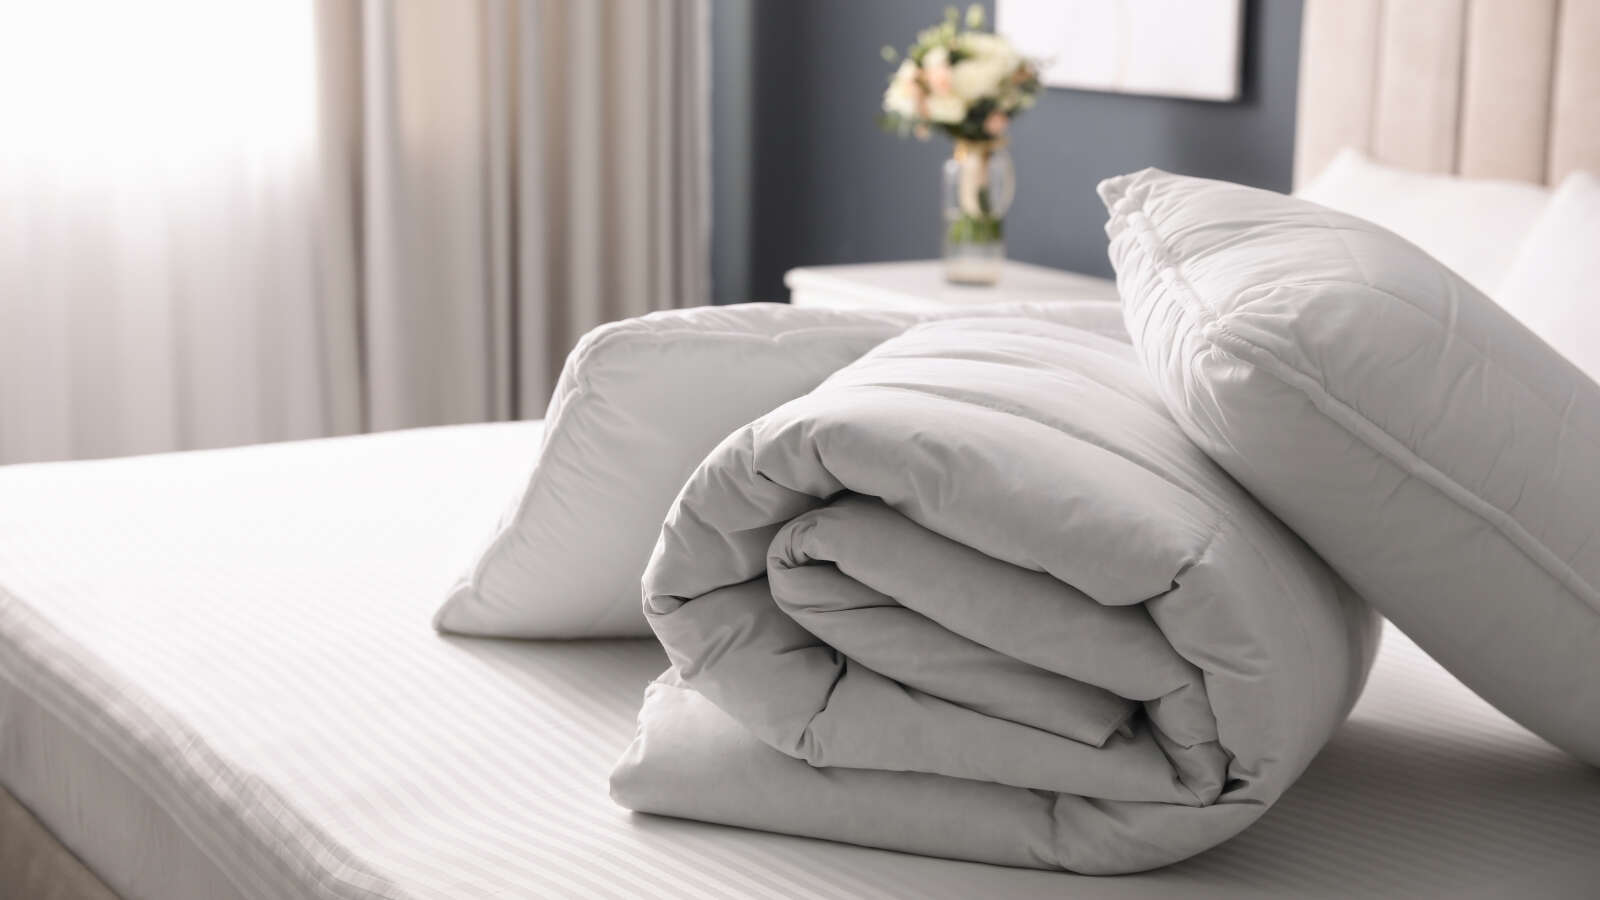 Take care of your pillows and duvets